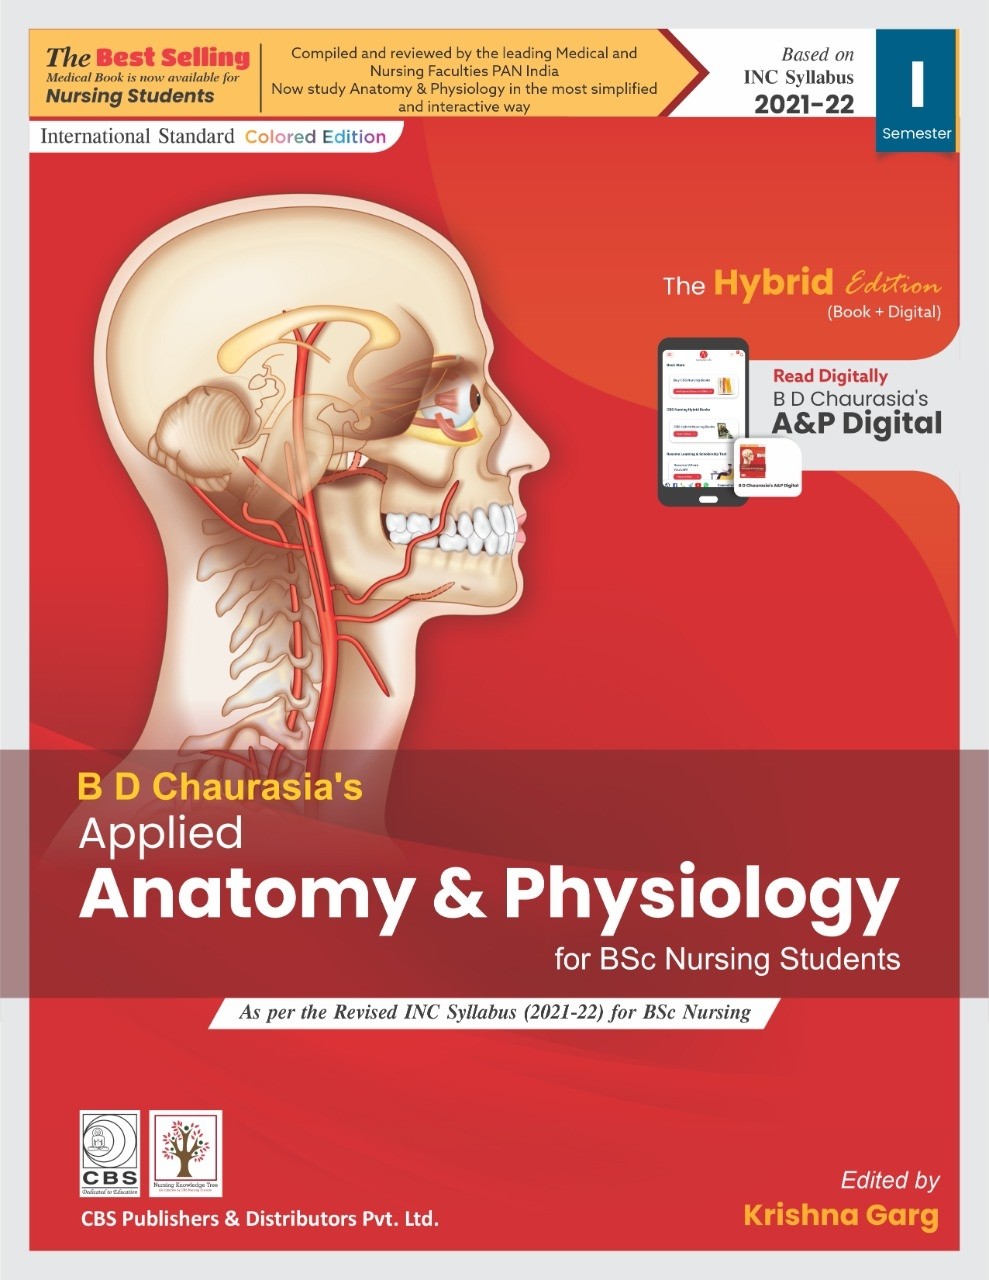 Buy Your Book Online BD Chaurasia's Applied Anatomy And Physiology For BSc  Nursing (Based On INC Syllabus 2021-22) | CBS Publication